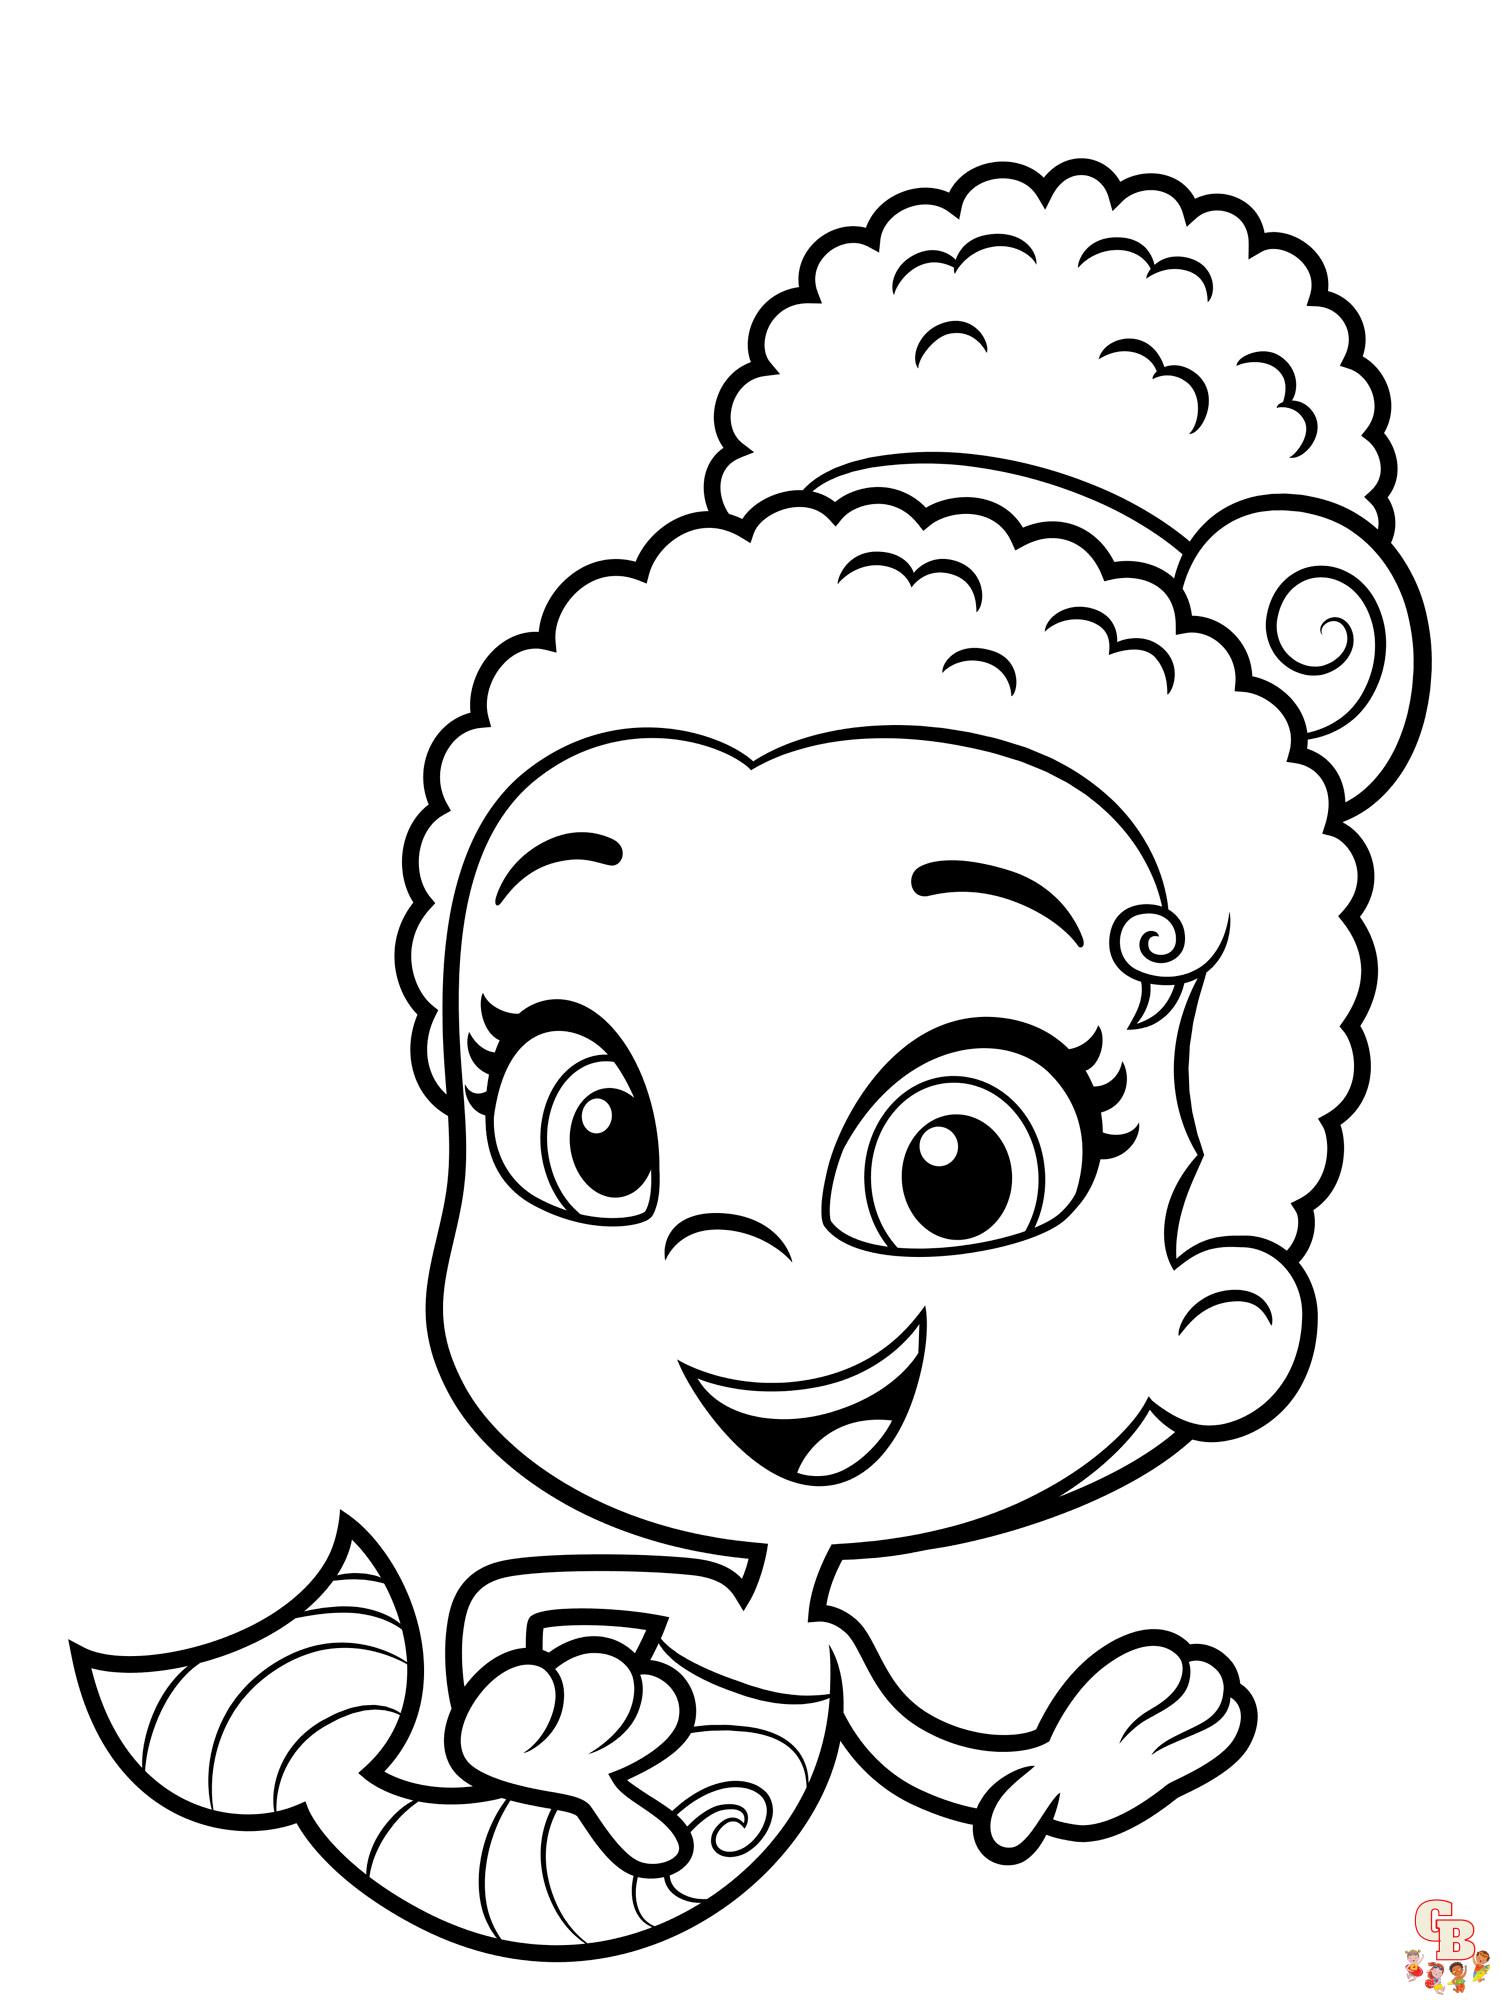 Free Bubble Guppies Coloring Pages - Printable and Easy!